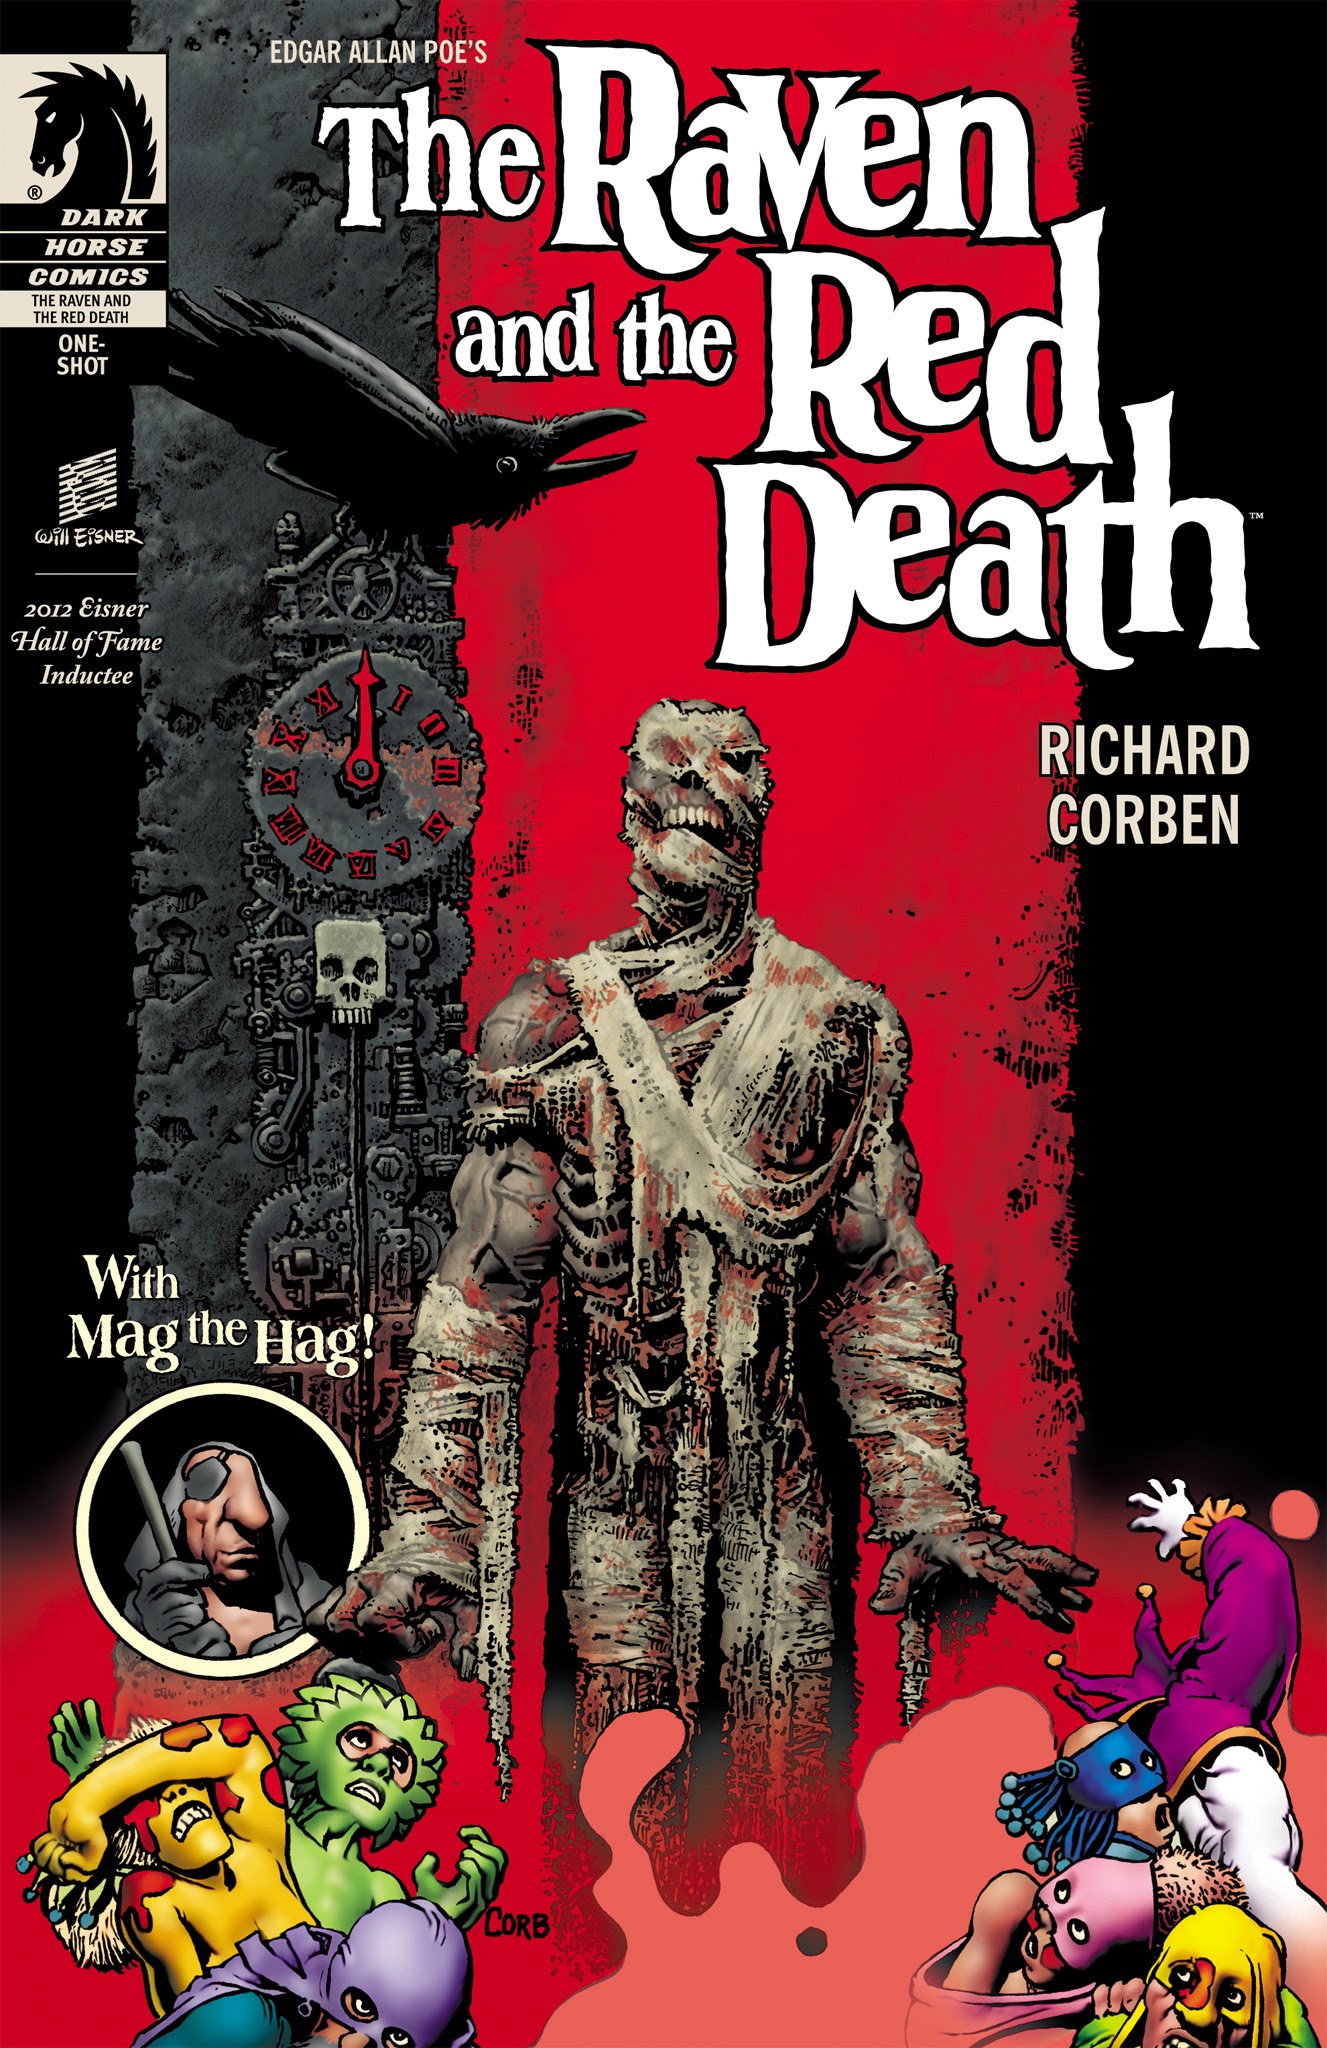 Read online Edgar Allan Poe's The Raven and the Red Death comic -  Issue # Full - 1